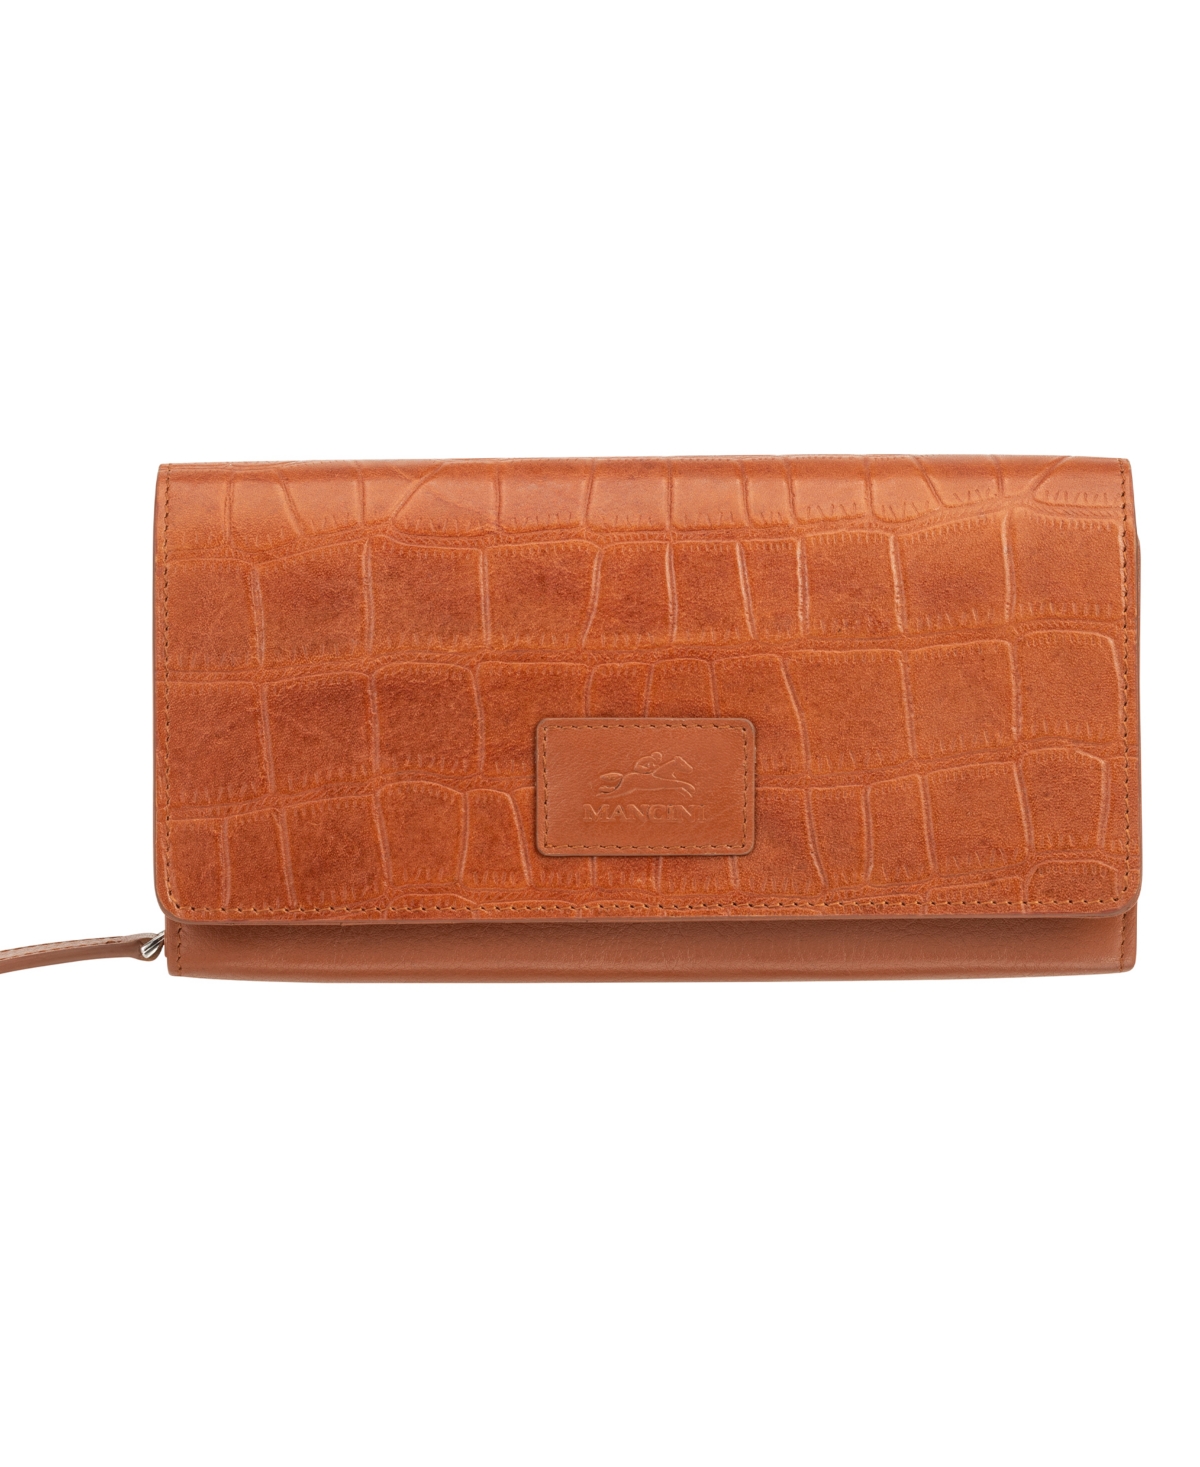 Women's Croco Collection Rfid Secure Clutch Wallet - Tan